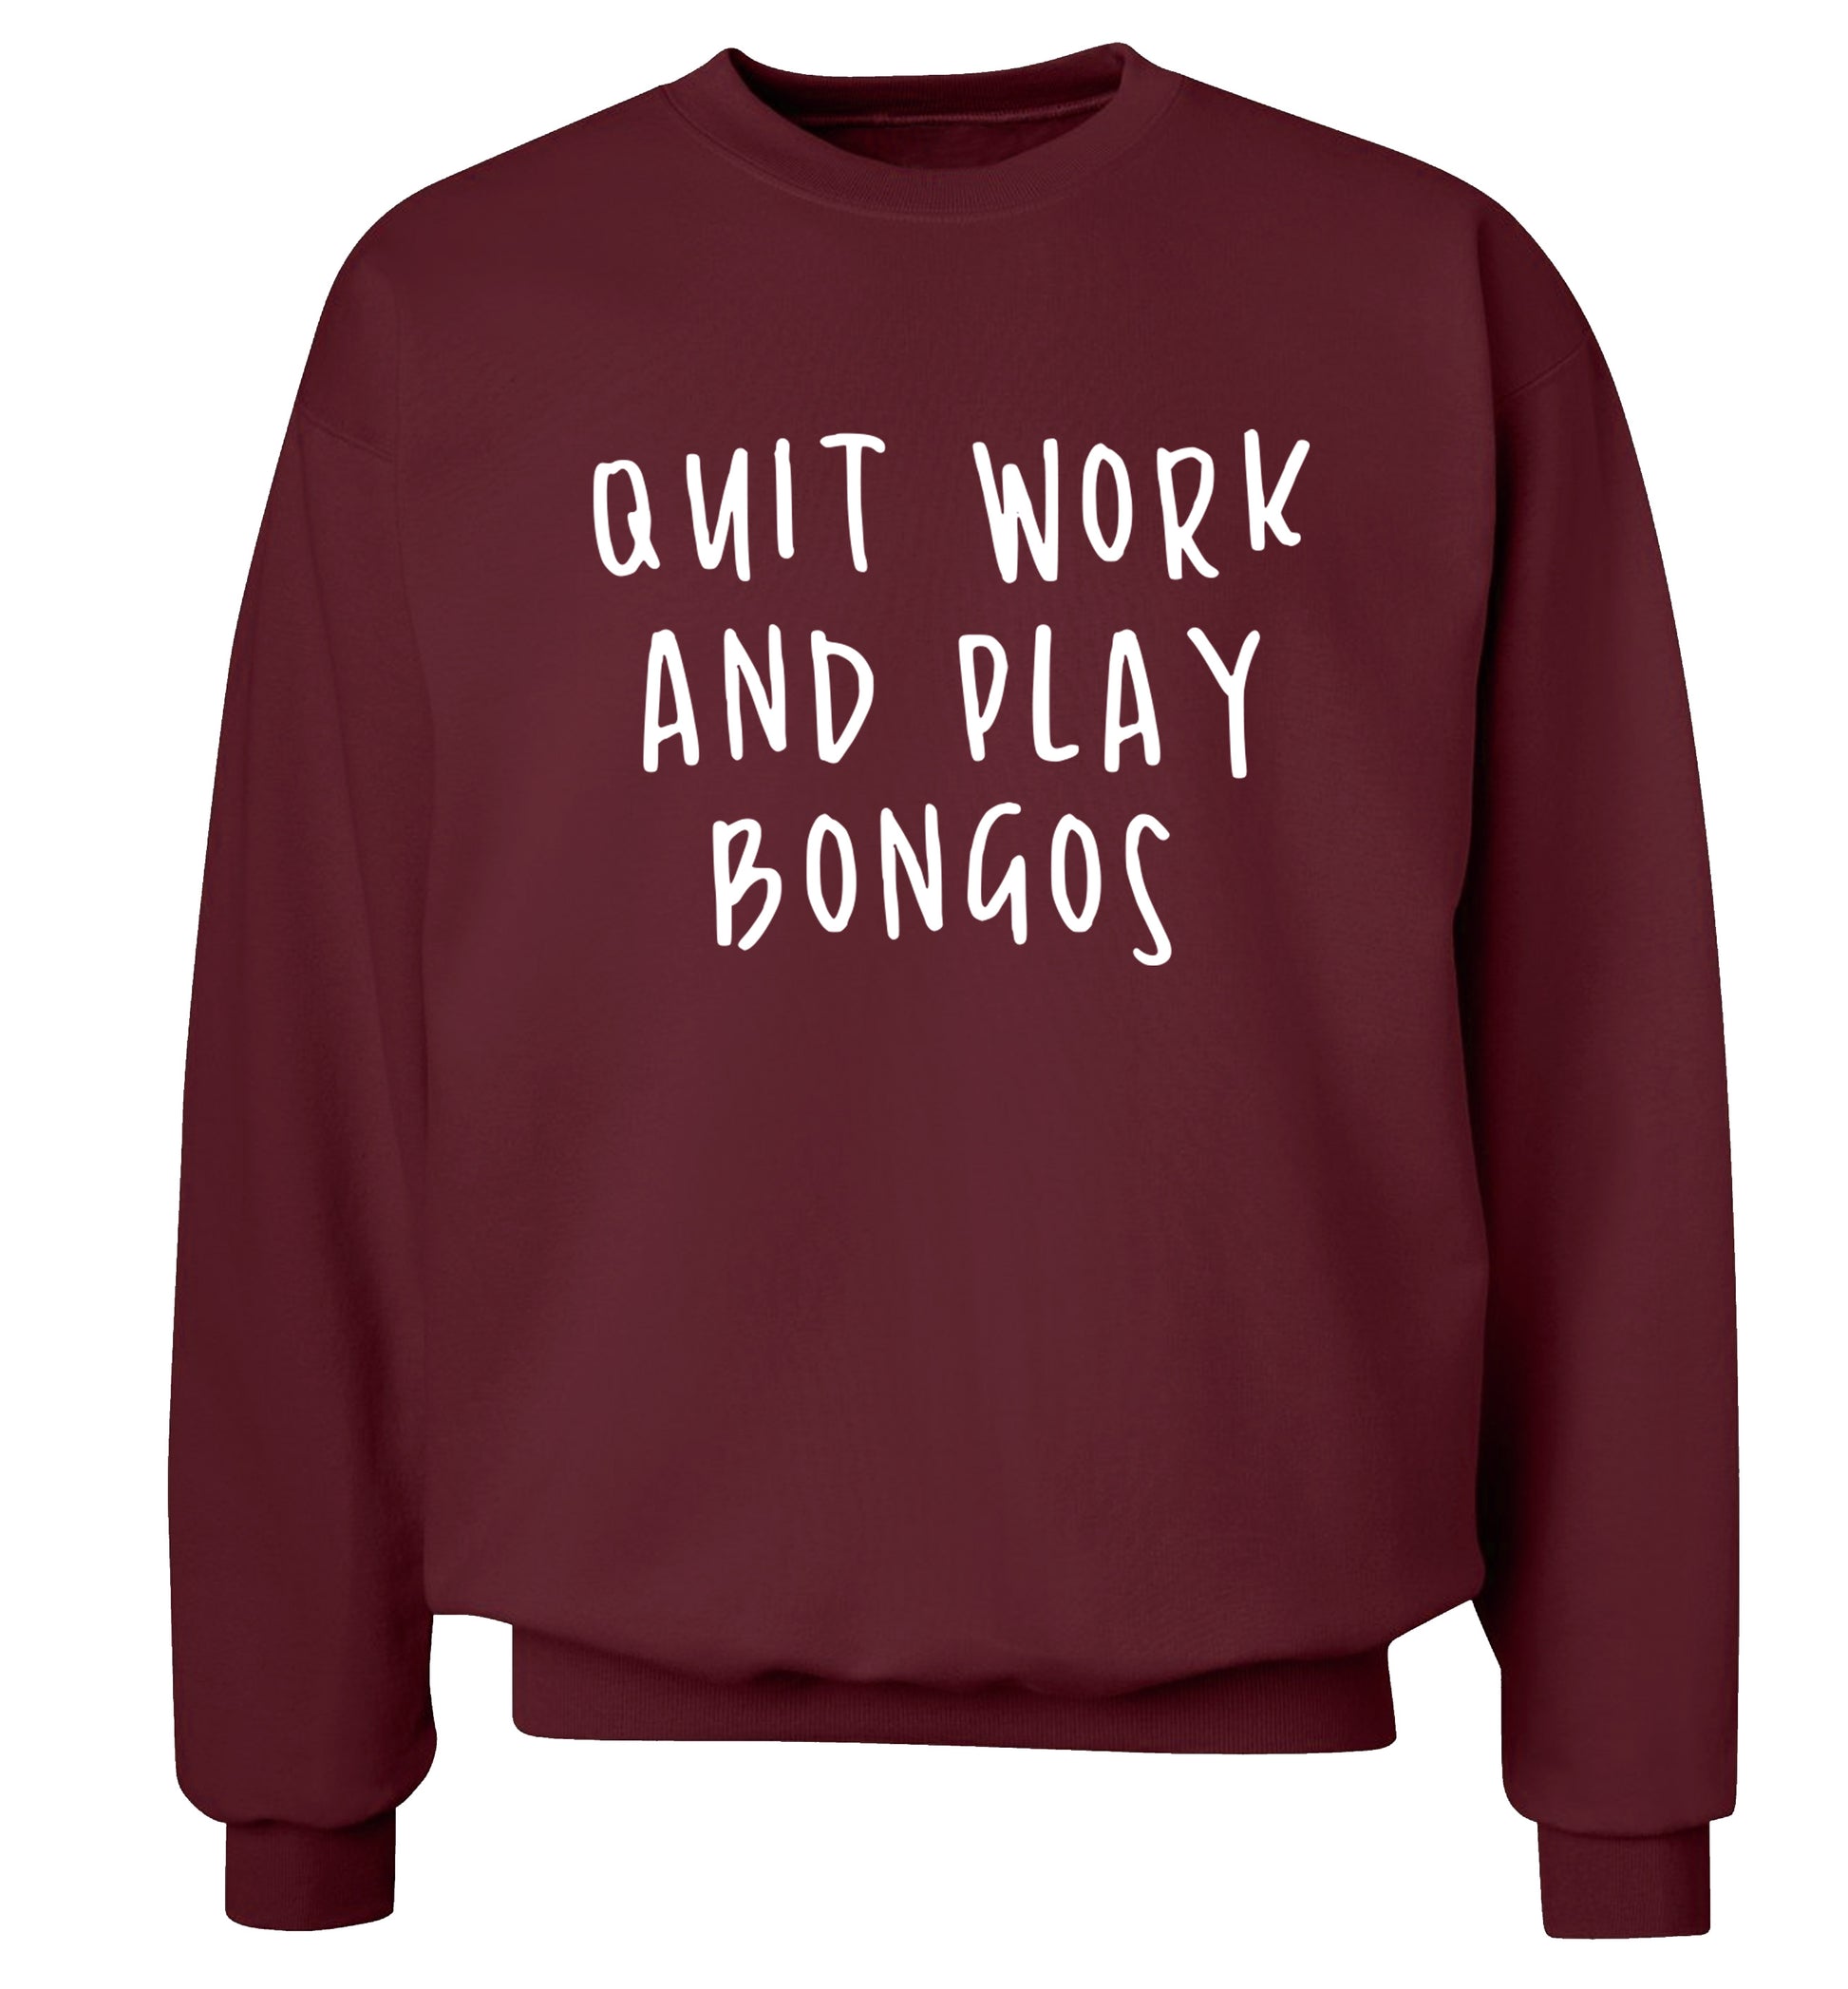 Quit work and play bongos Adult's unisex maroon Sweater 2XL